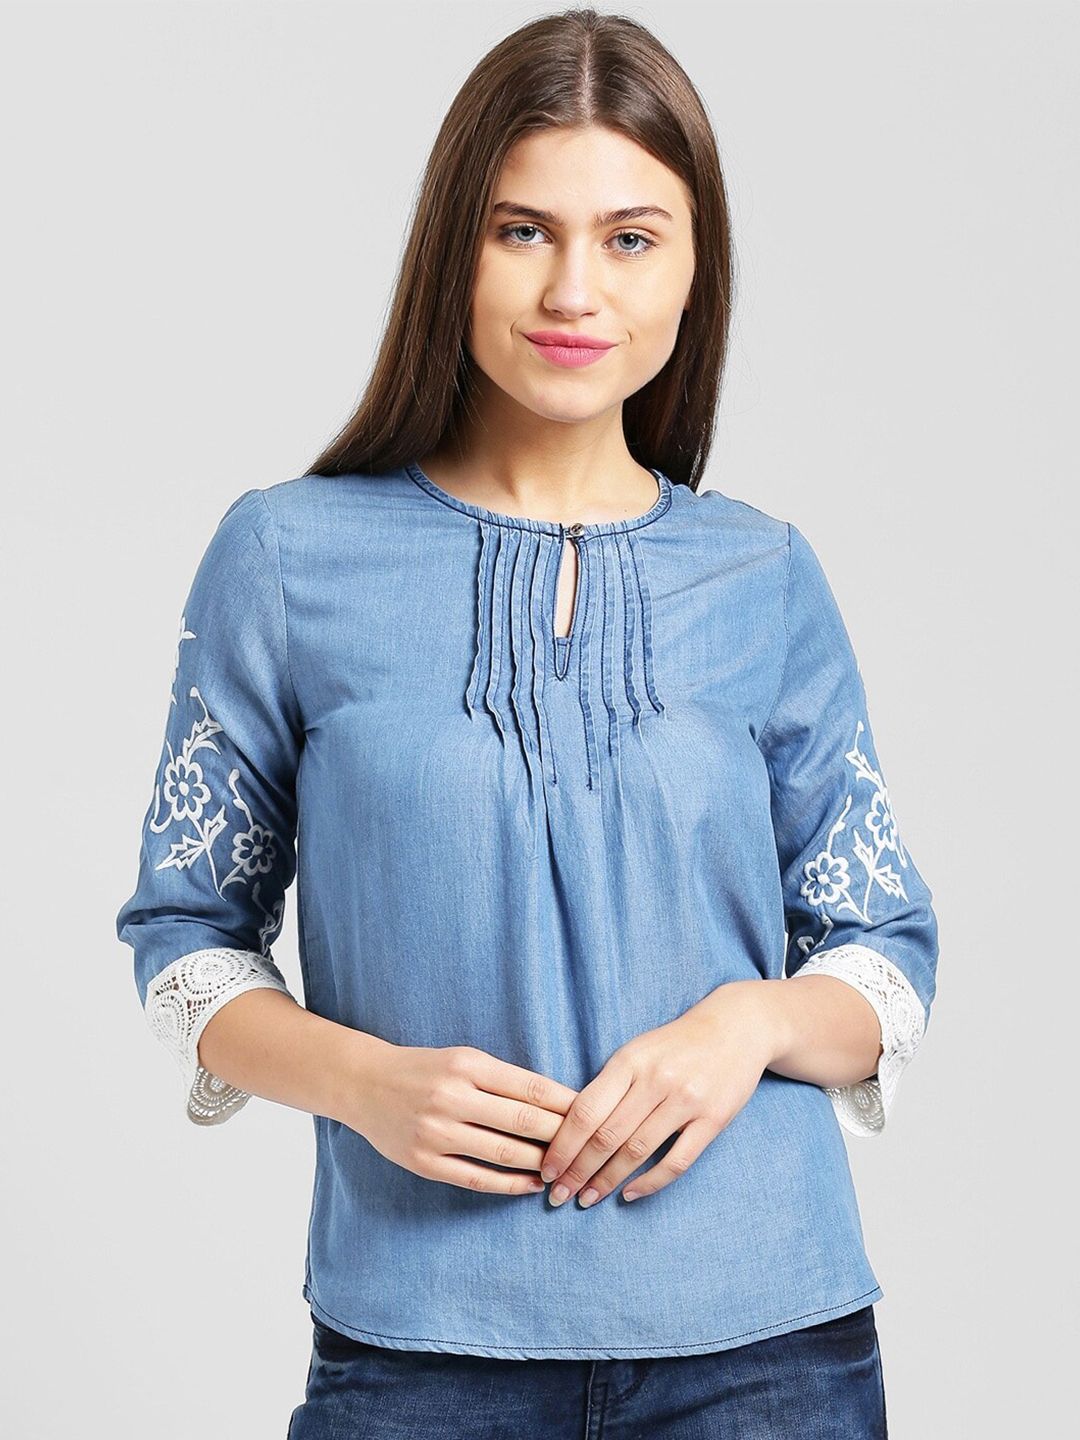 Be Indi Blue Keyhole Neck Top Price in India